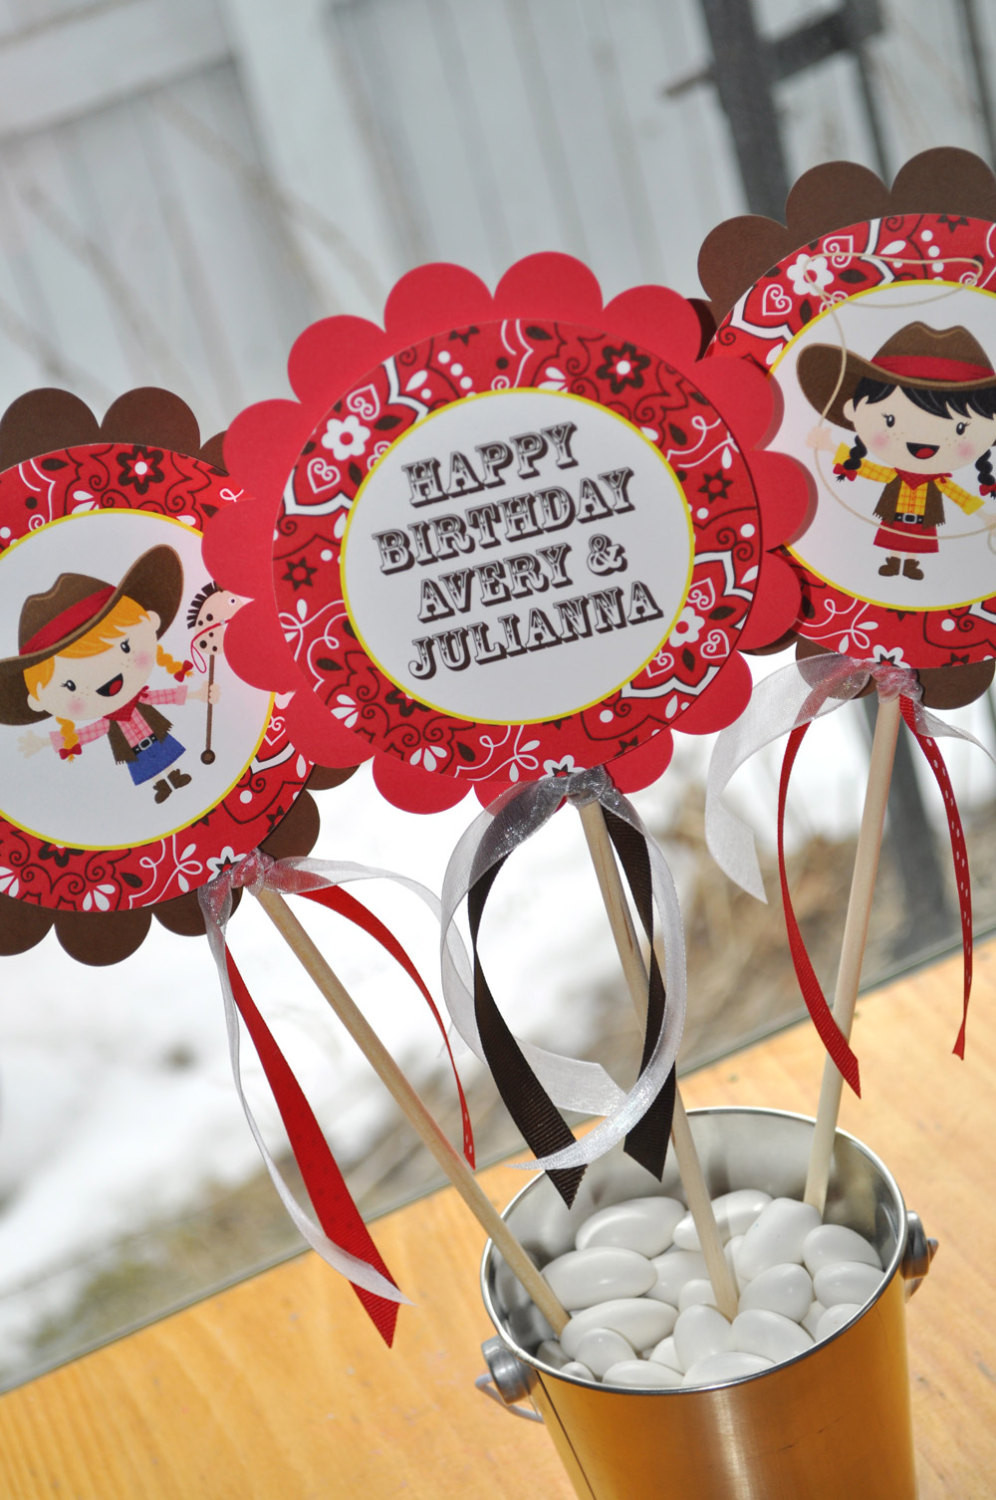 Cowgirl Birthday Party Ideas And Supplies
 Cowgirl Birthday Centerpiece Sticks – Cowgirl Birthday